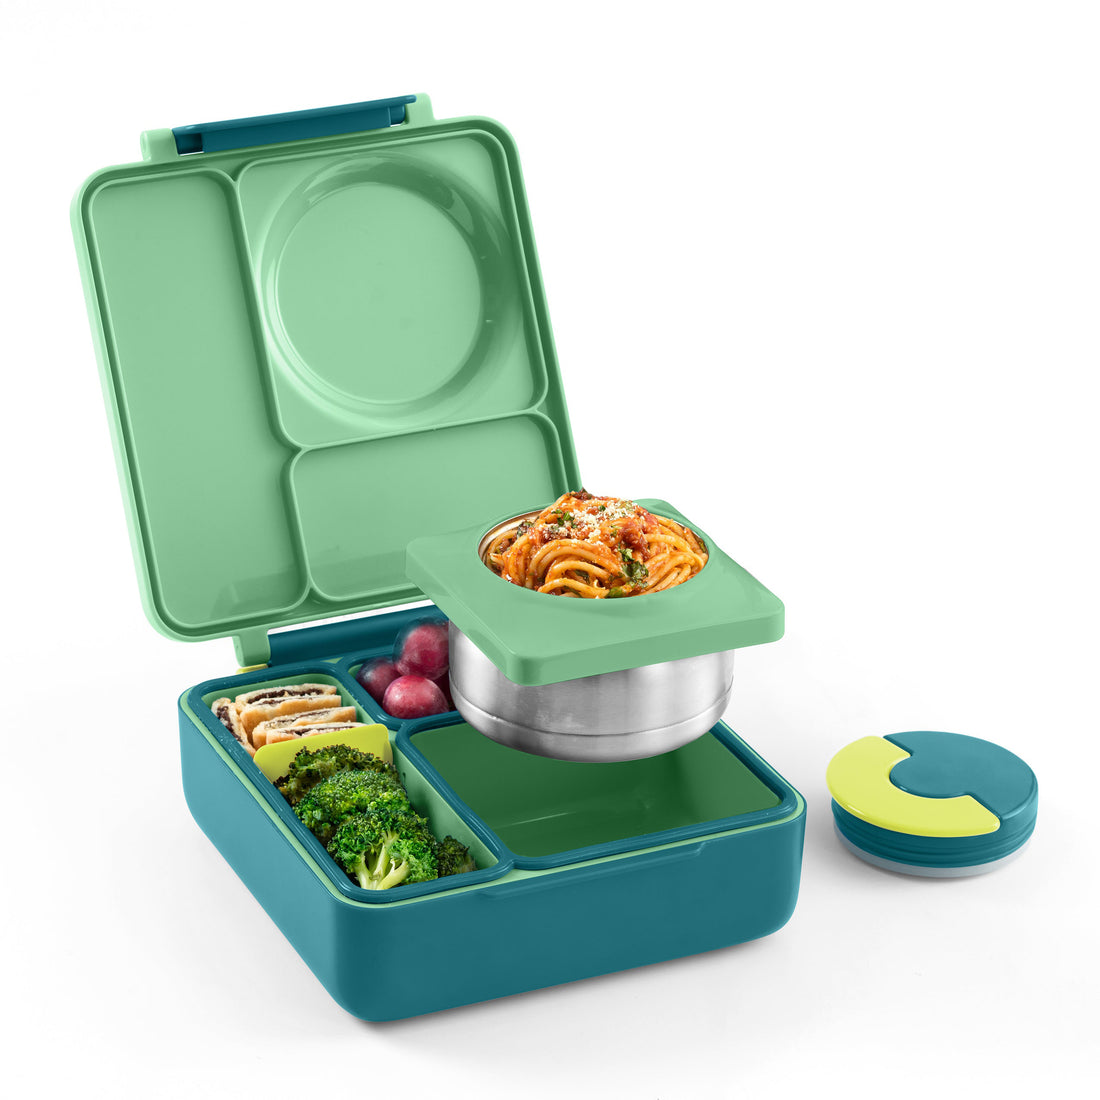 omiebox-insulated-hot-&-cold-bento-box-meadow-omie-v266fc07- (2)